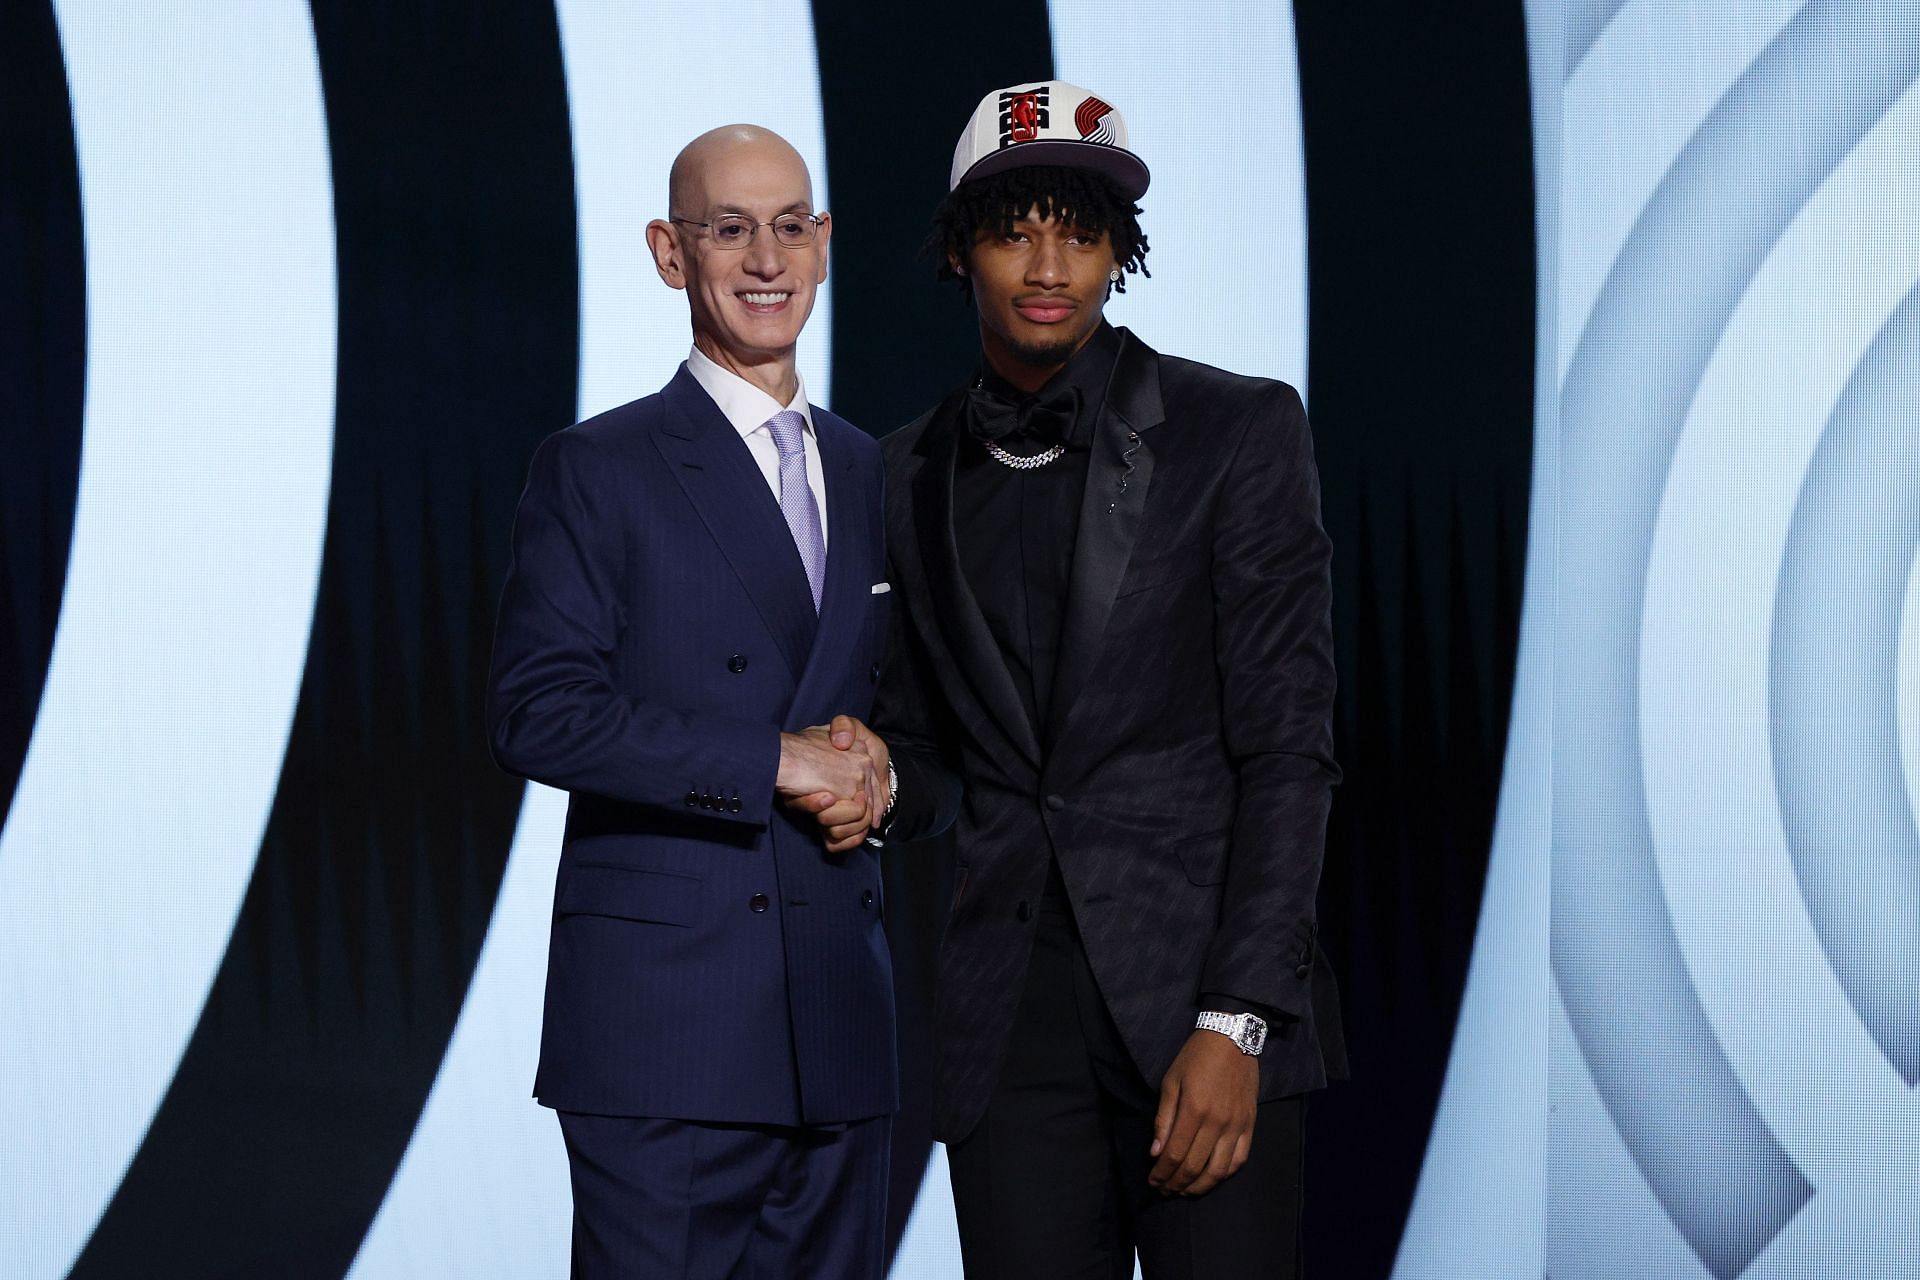 Shaedon Sharpe was drafted 7th overall by the Blazers at the 2022 NBA draft.